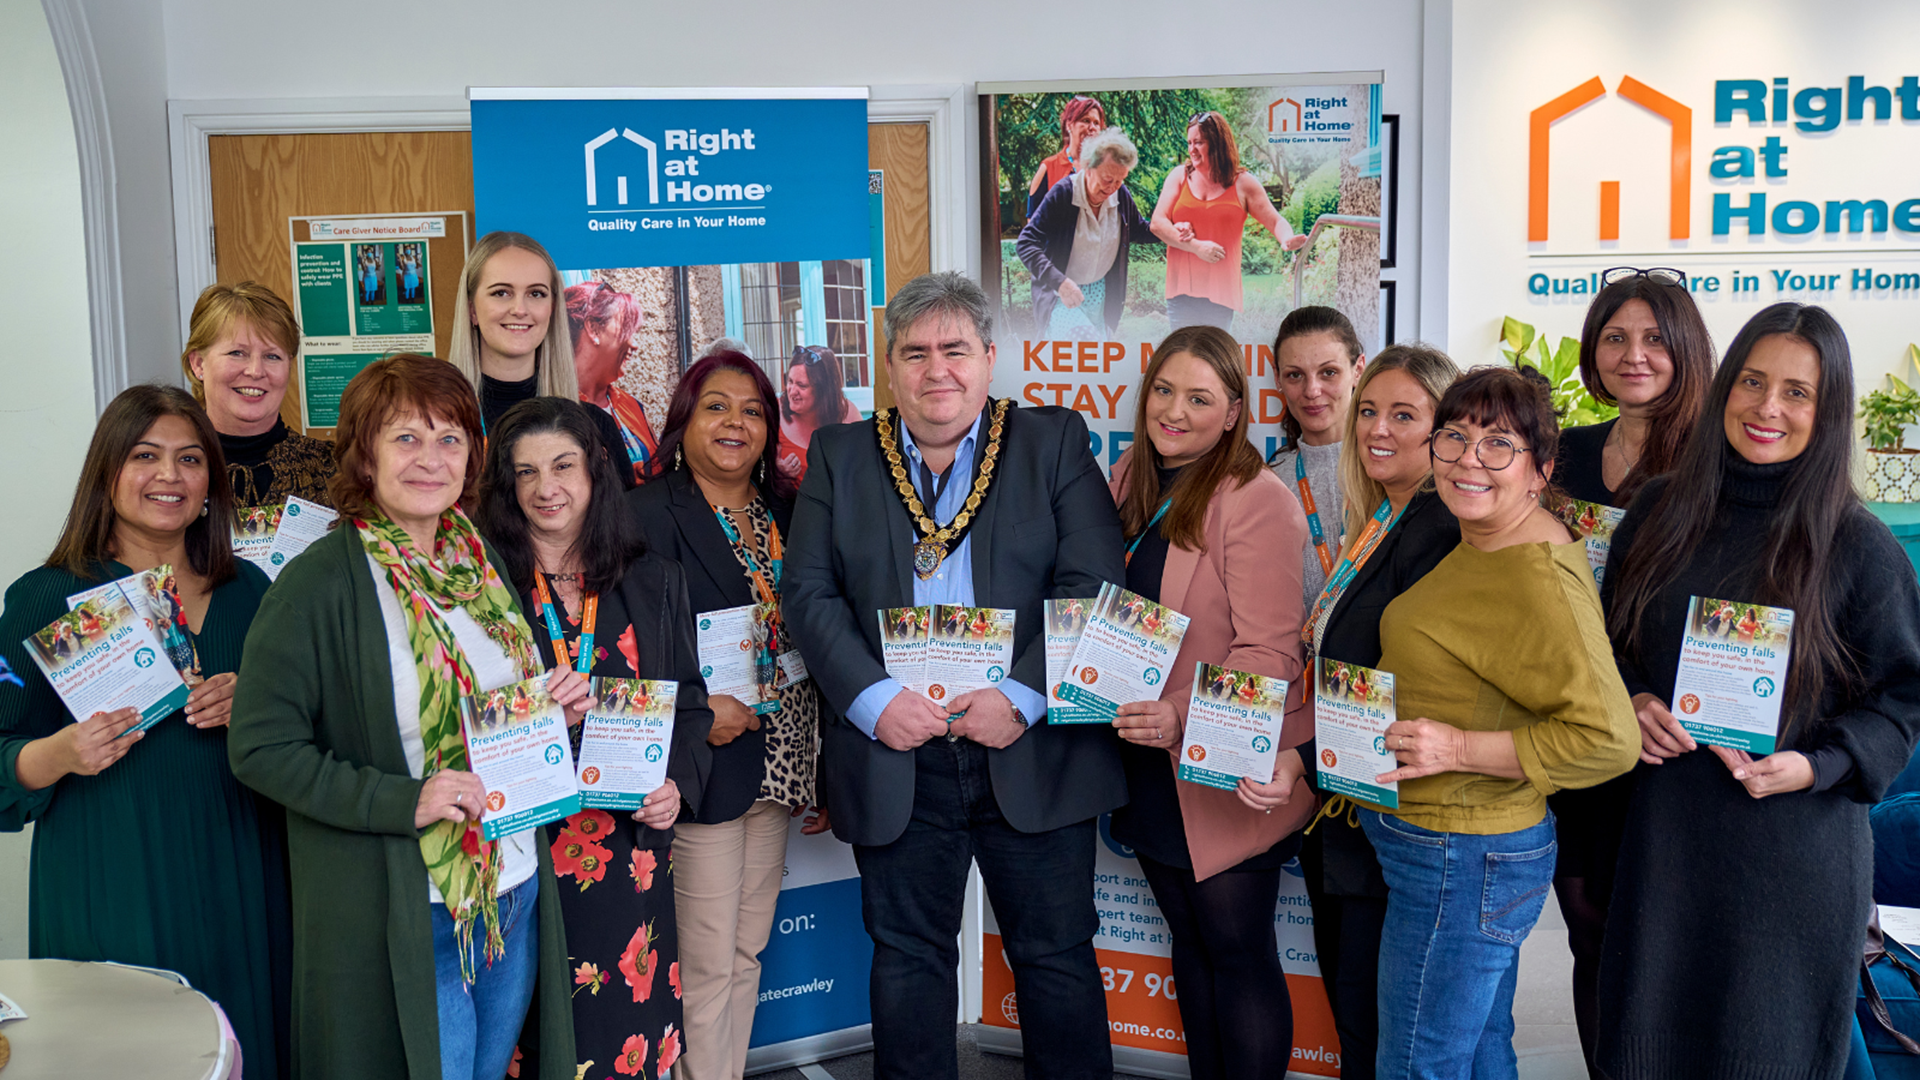 Redhill Care assistants welcome mayor in Reigate to launch free falls prevention campaign in the community